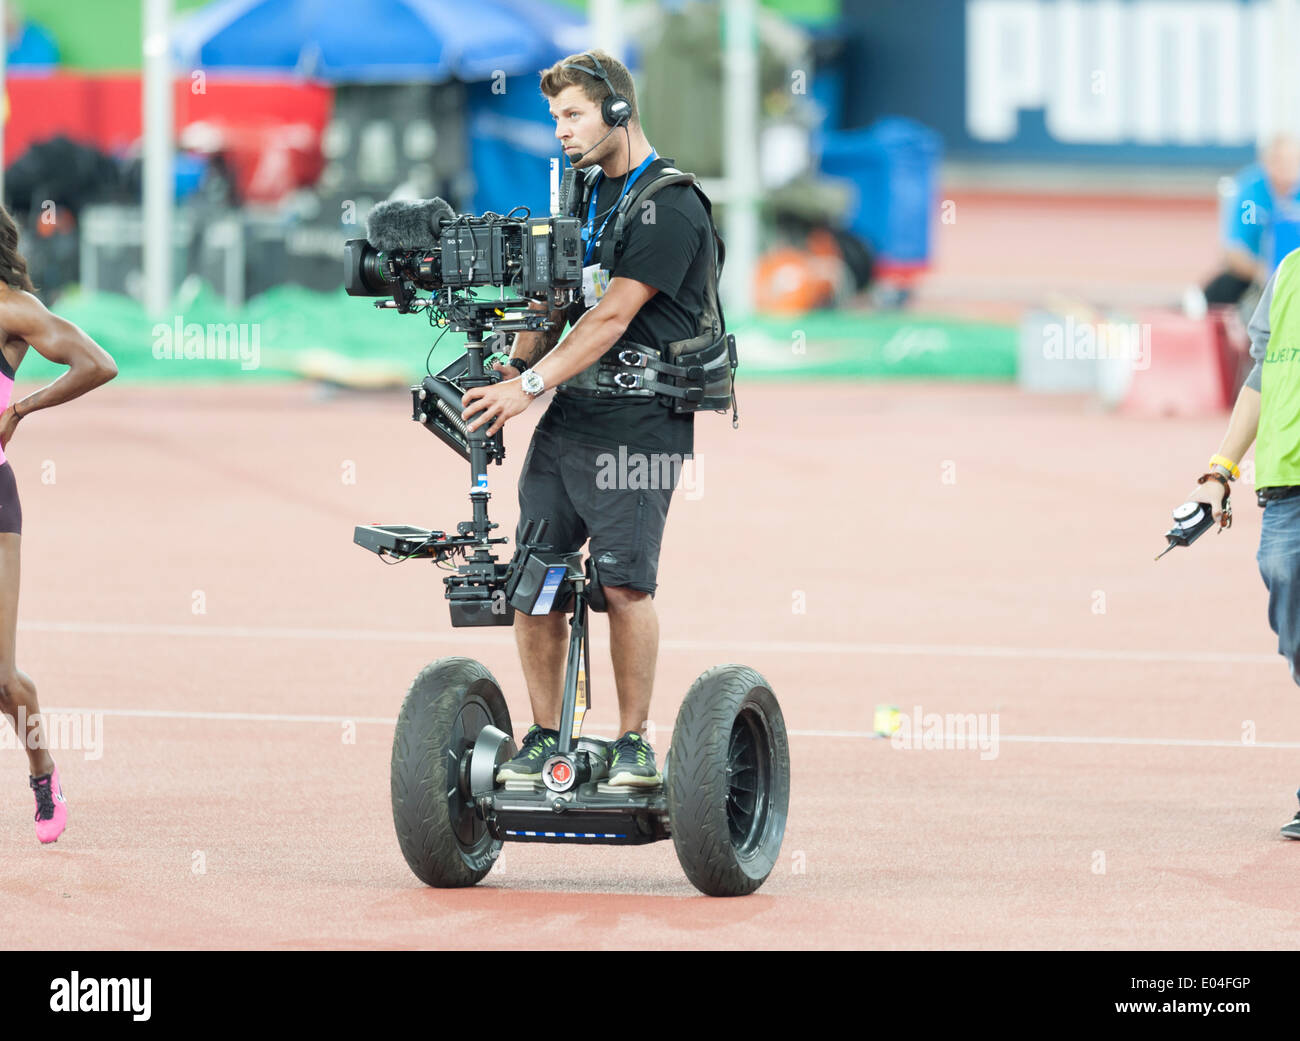 Camera operator standing on a Segway and equipped with Steadicam camera stabilizing system during an athletics meeting Stock Photo